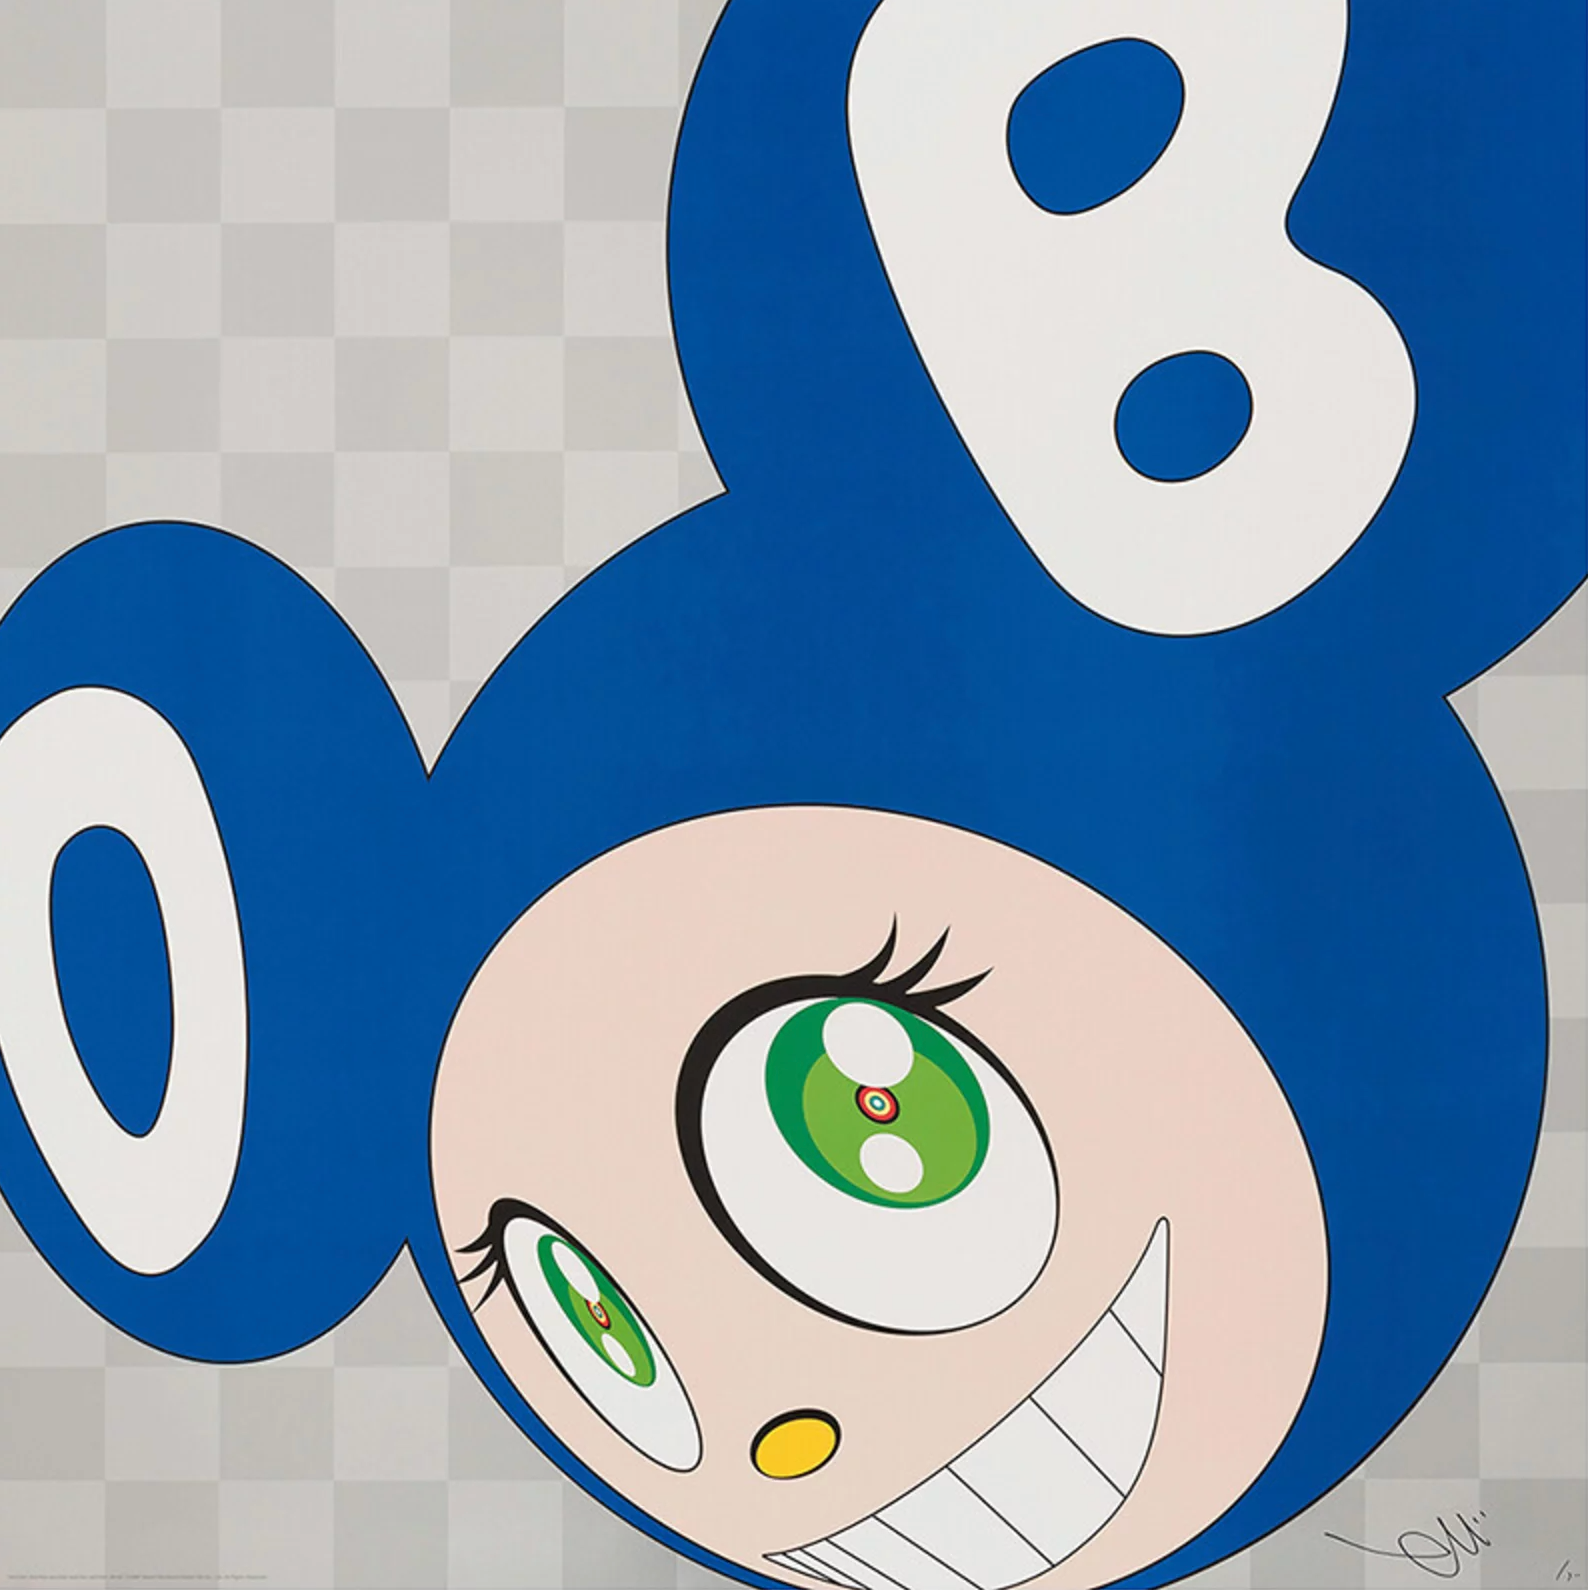 Takashi Murakami - And then and then and then and then and then (Blue), 1999 - Pinto Gallery